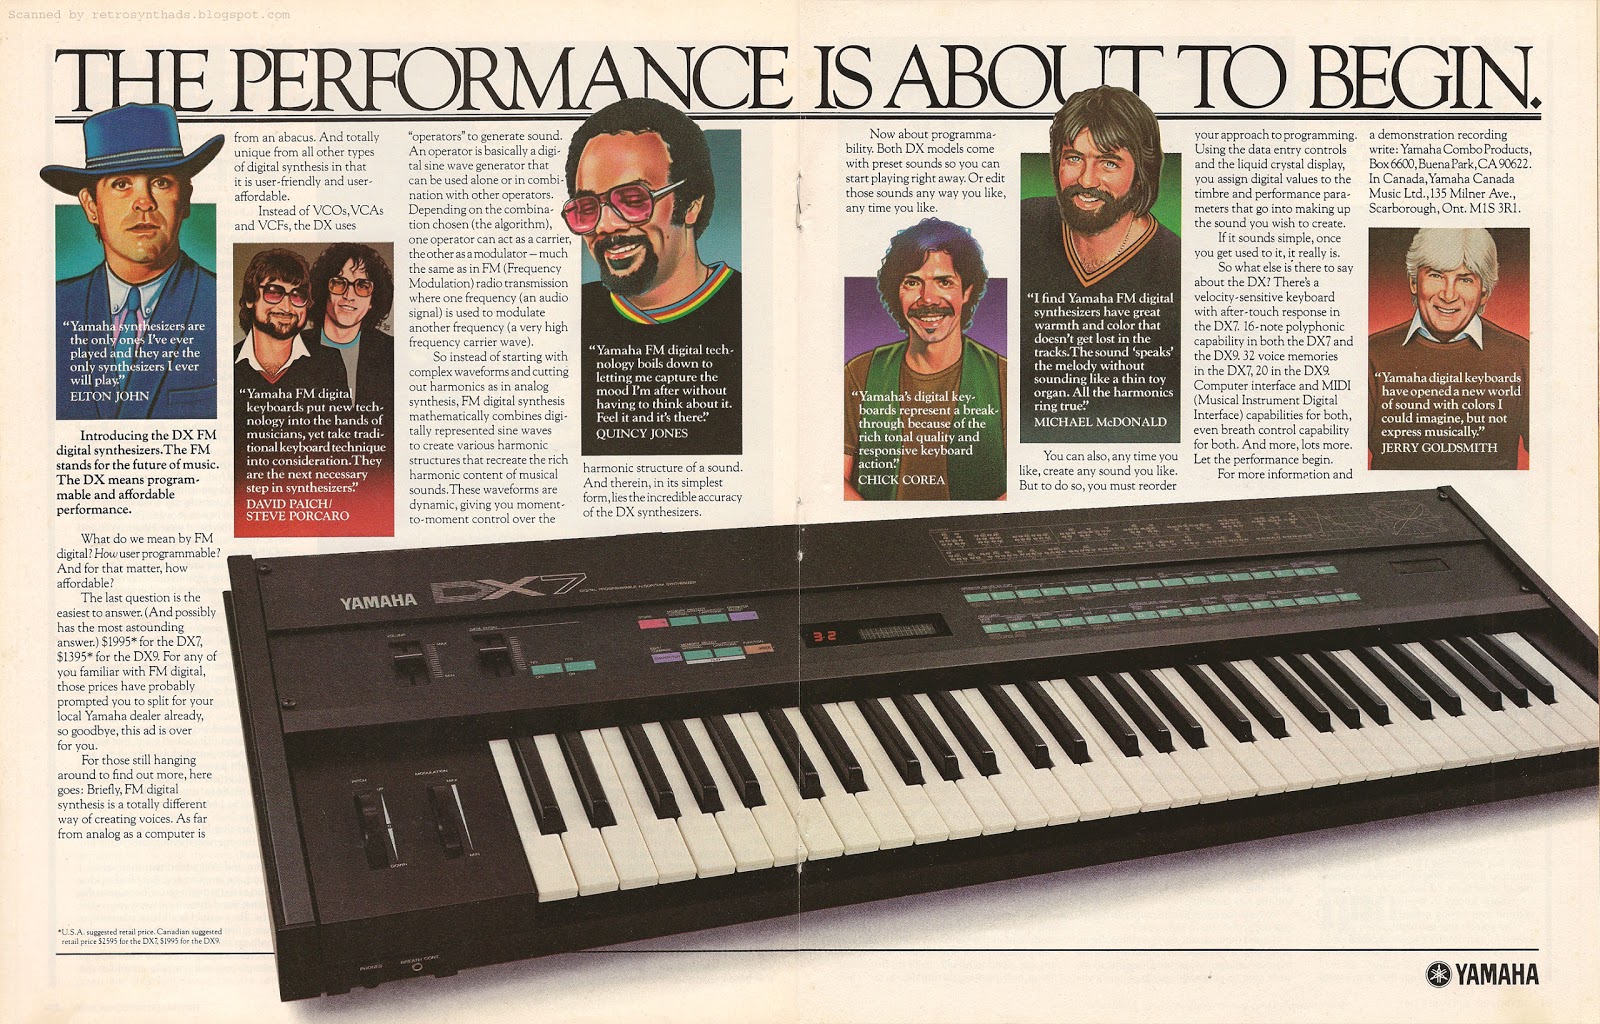 Retro Synth Ads Yamaha Dx7 The Performance Is About To Begin 2 Page Ad Part 1 Keyboard 19